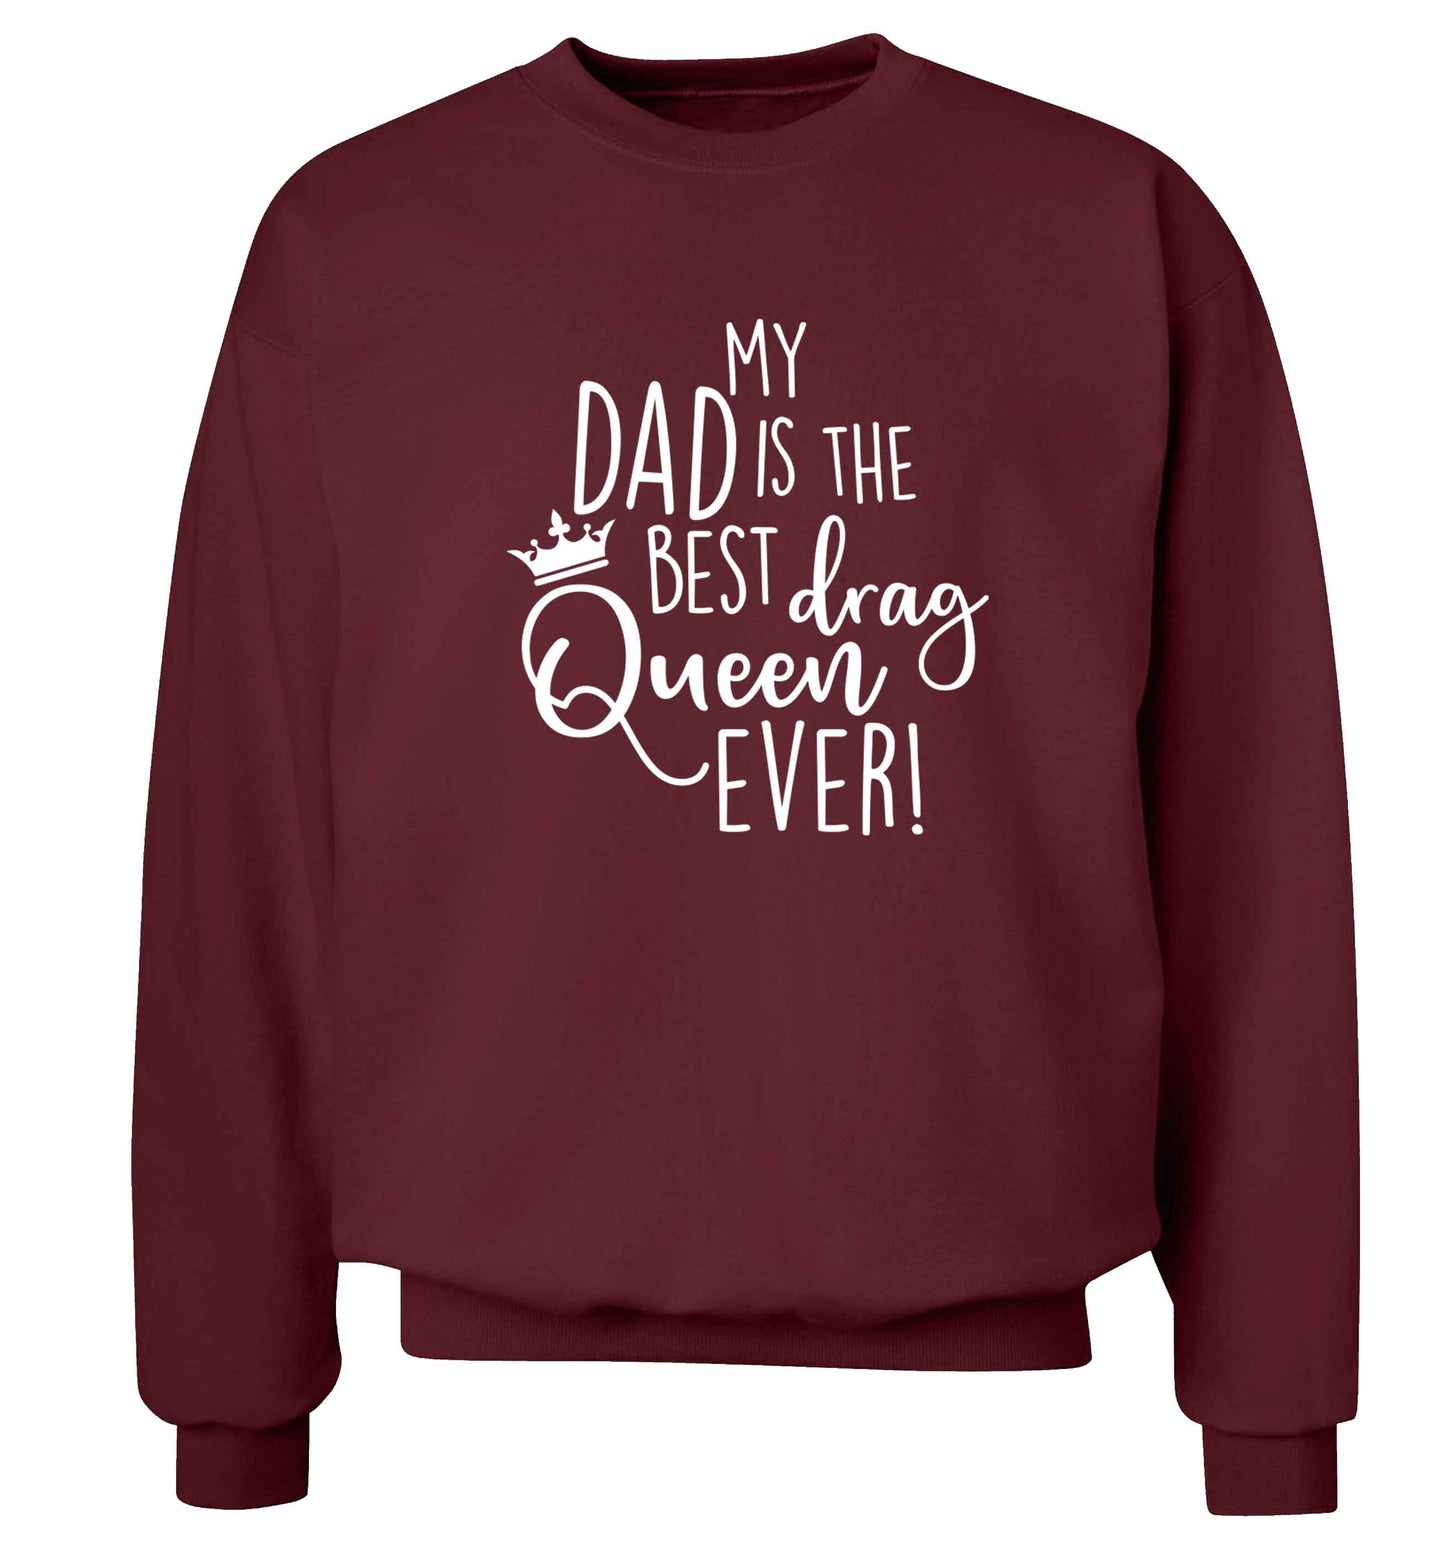 My dad is the best drag Queen ever Adult's unisex maroon Sweater 2XL